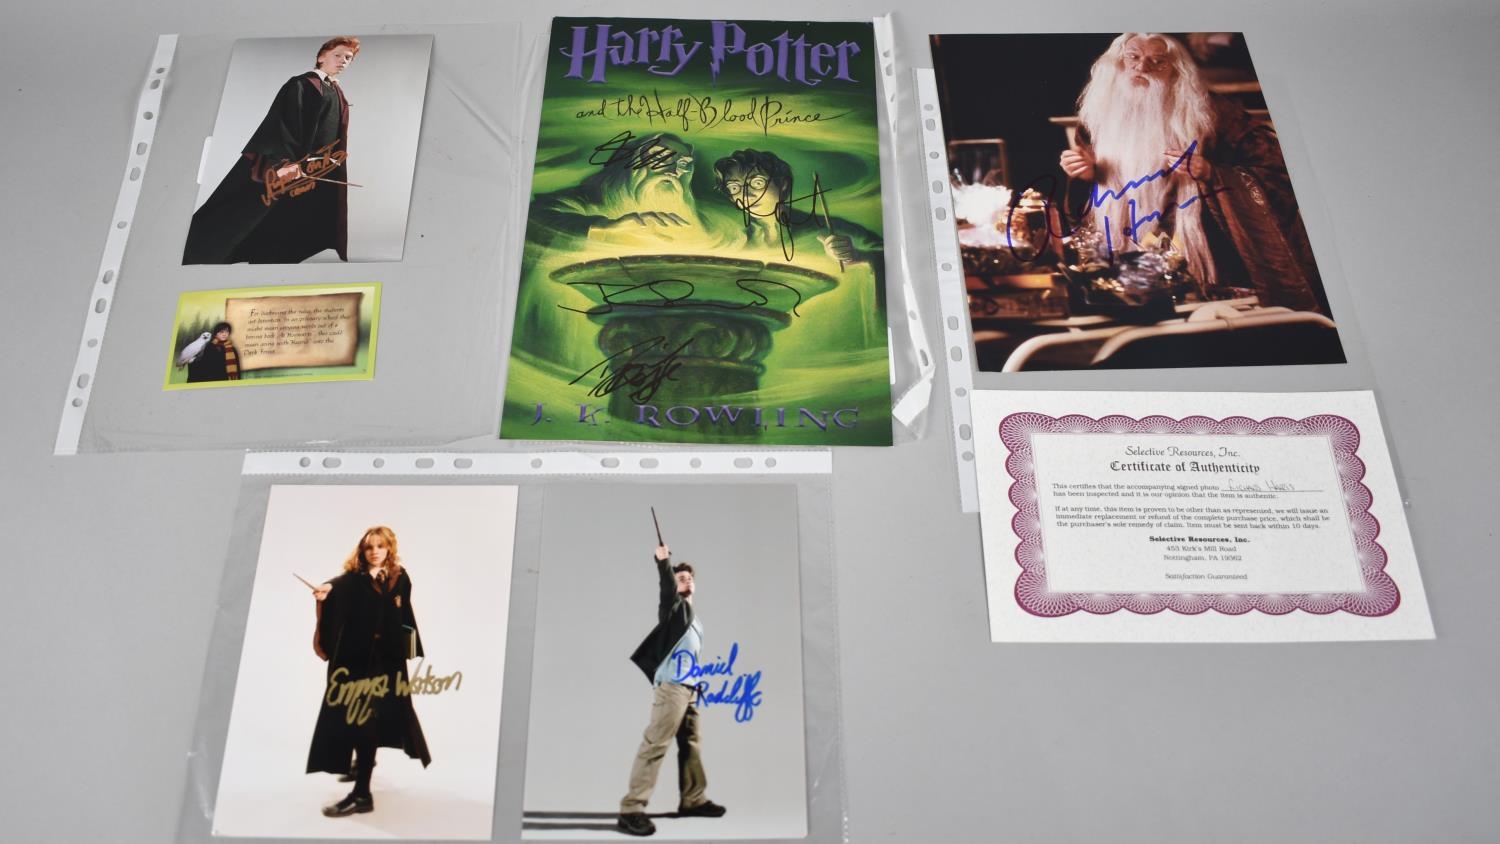 A Collection of Various Autographed Photographs from Harry Potter to include Daniel Radcliffe,